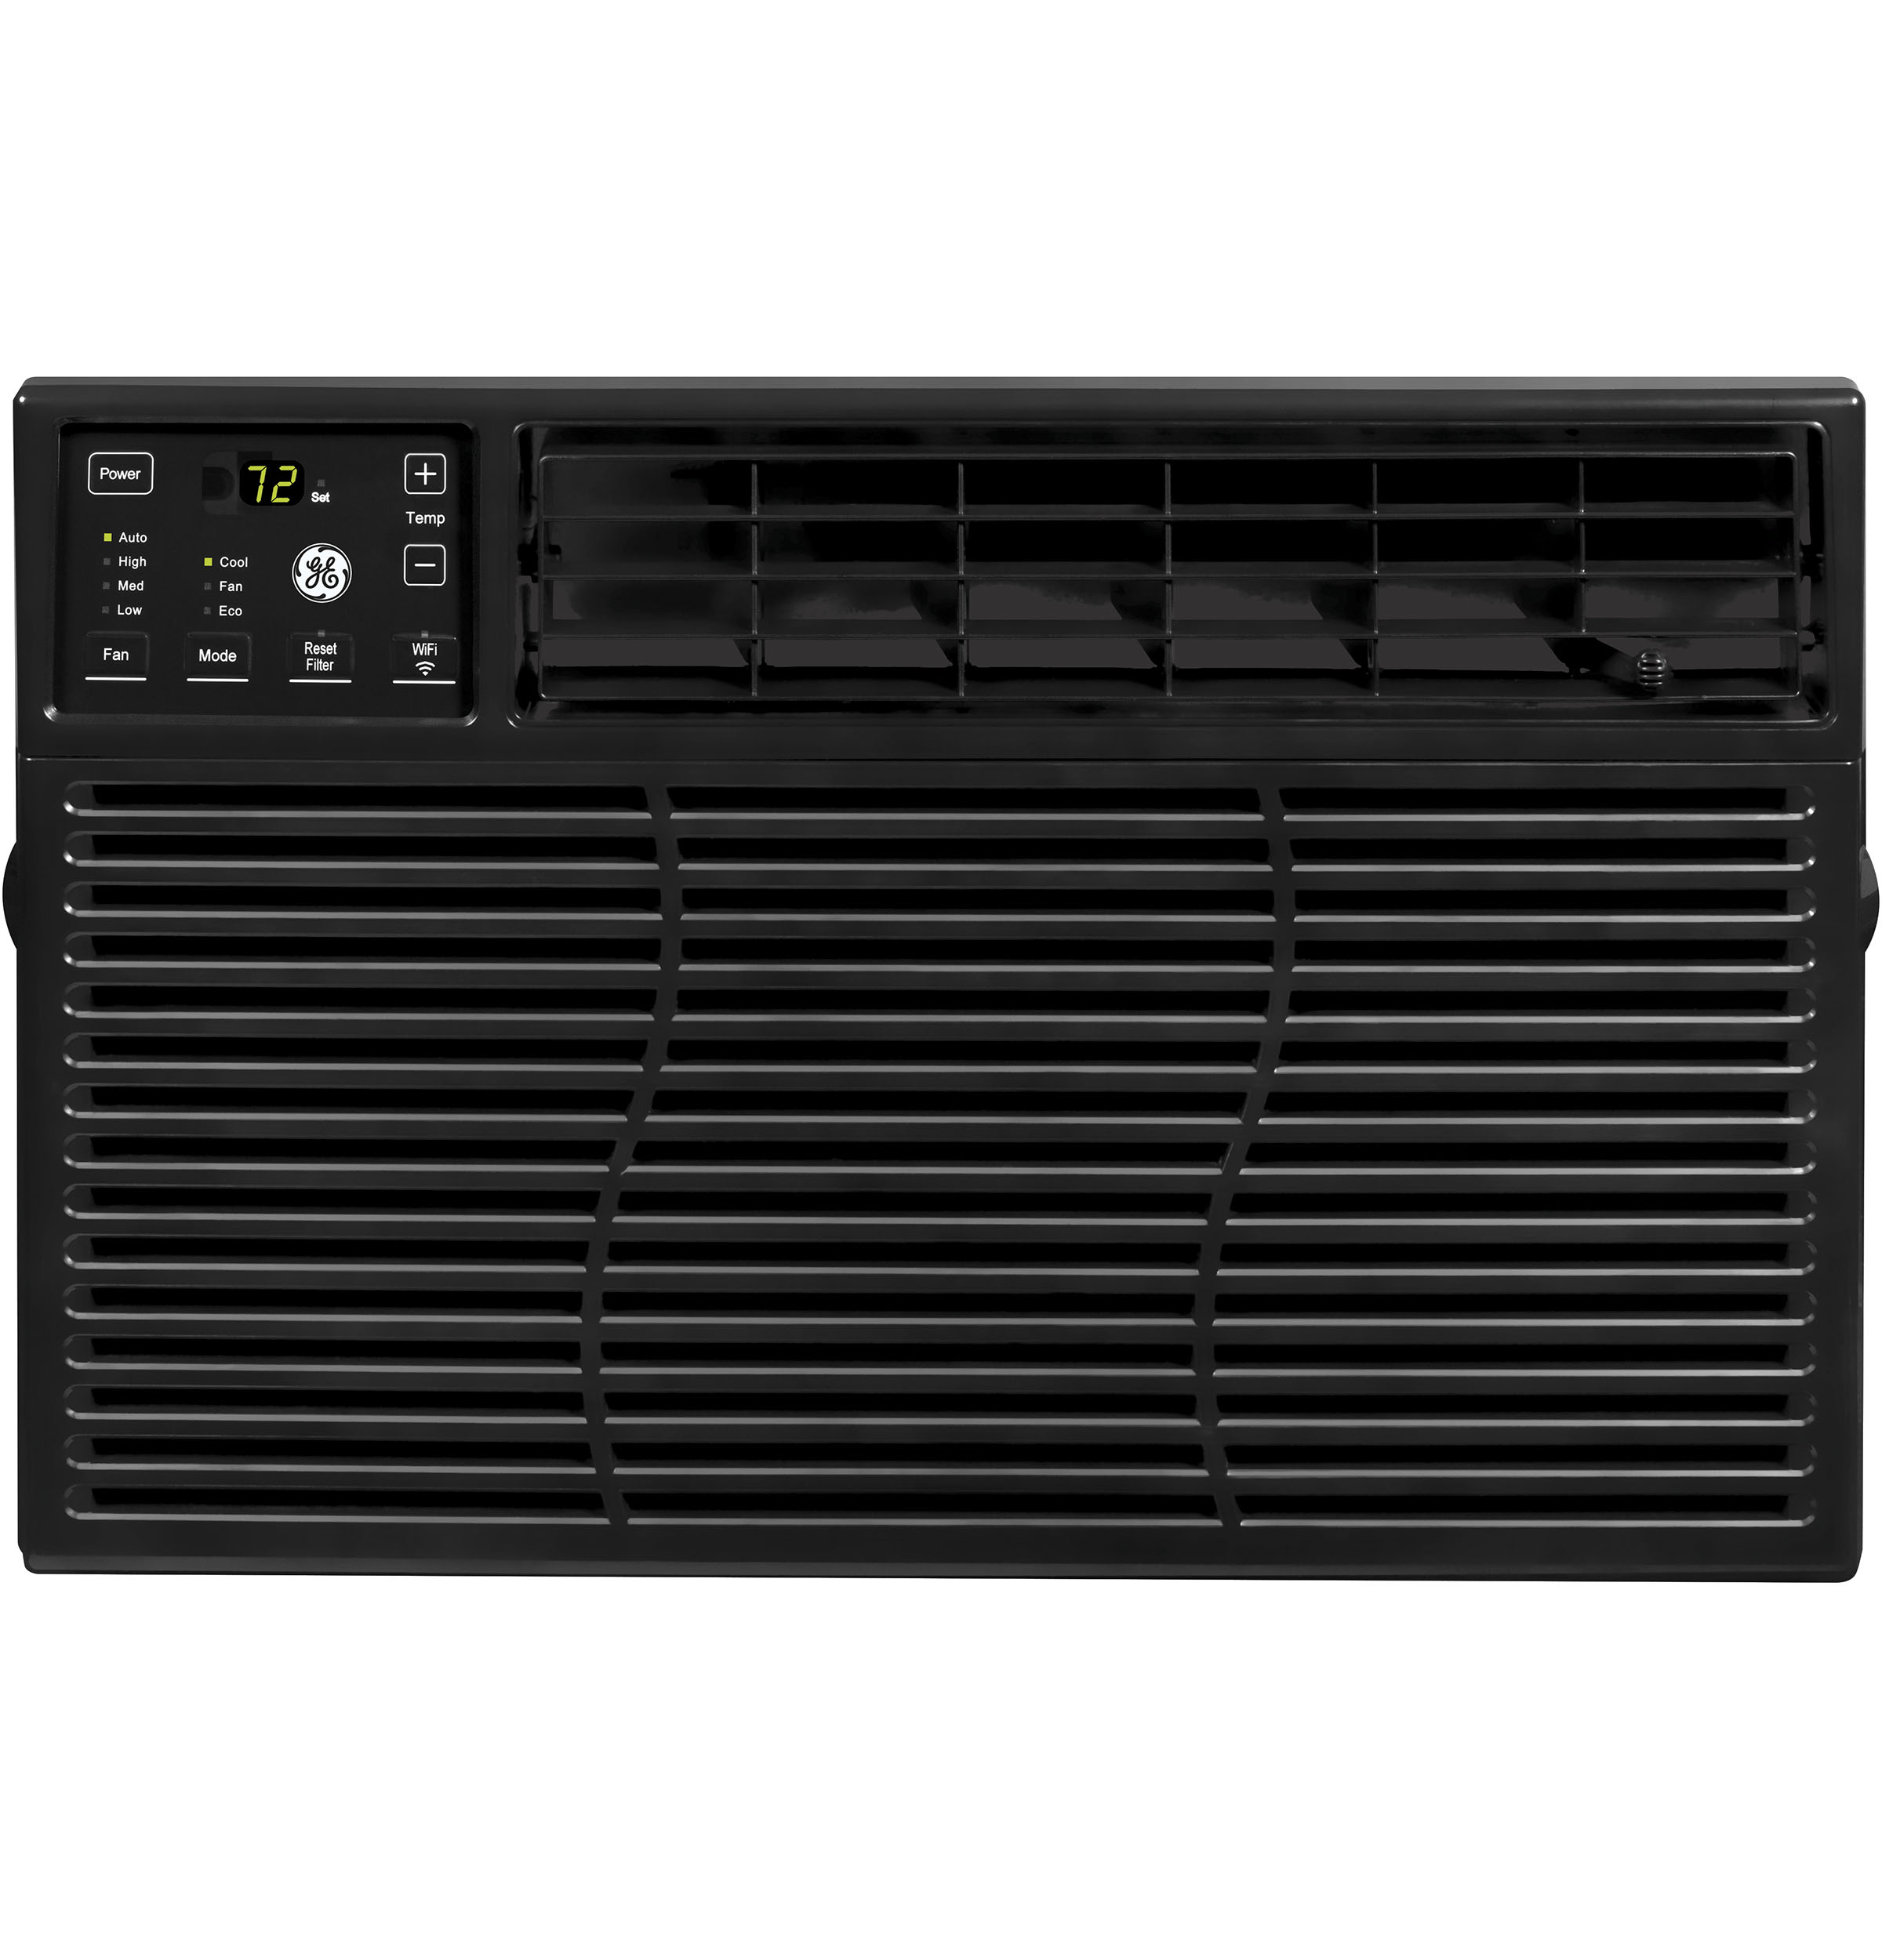 GE® ENERGY STAR® 8,000 BTU Electronic Window Air Conditioner for Medium Rooms up to 350 sq. ft., Black